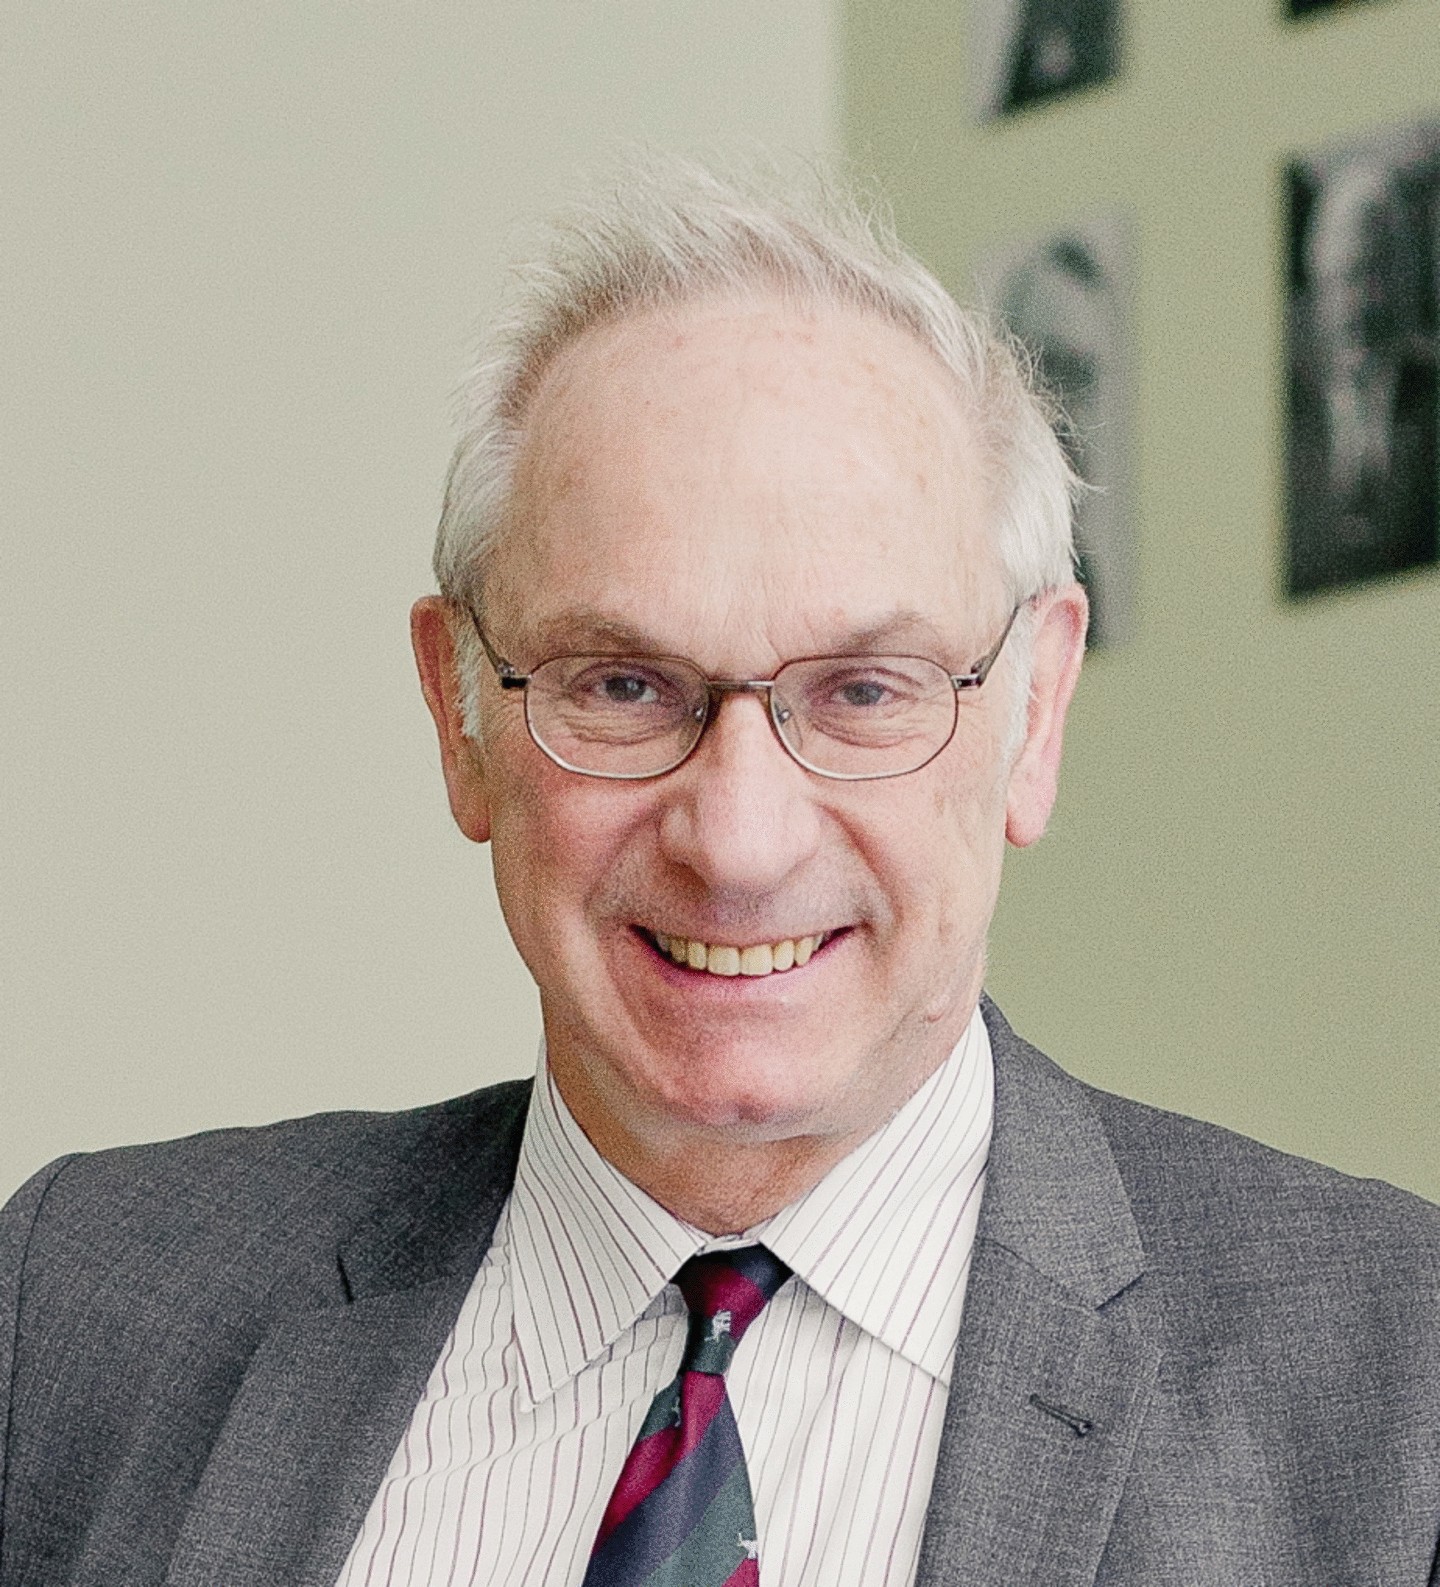 Prof. Dr. Wolfgang Wessels - Director